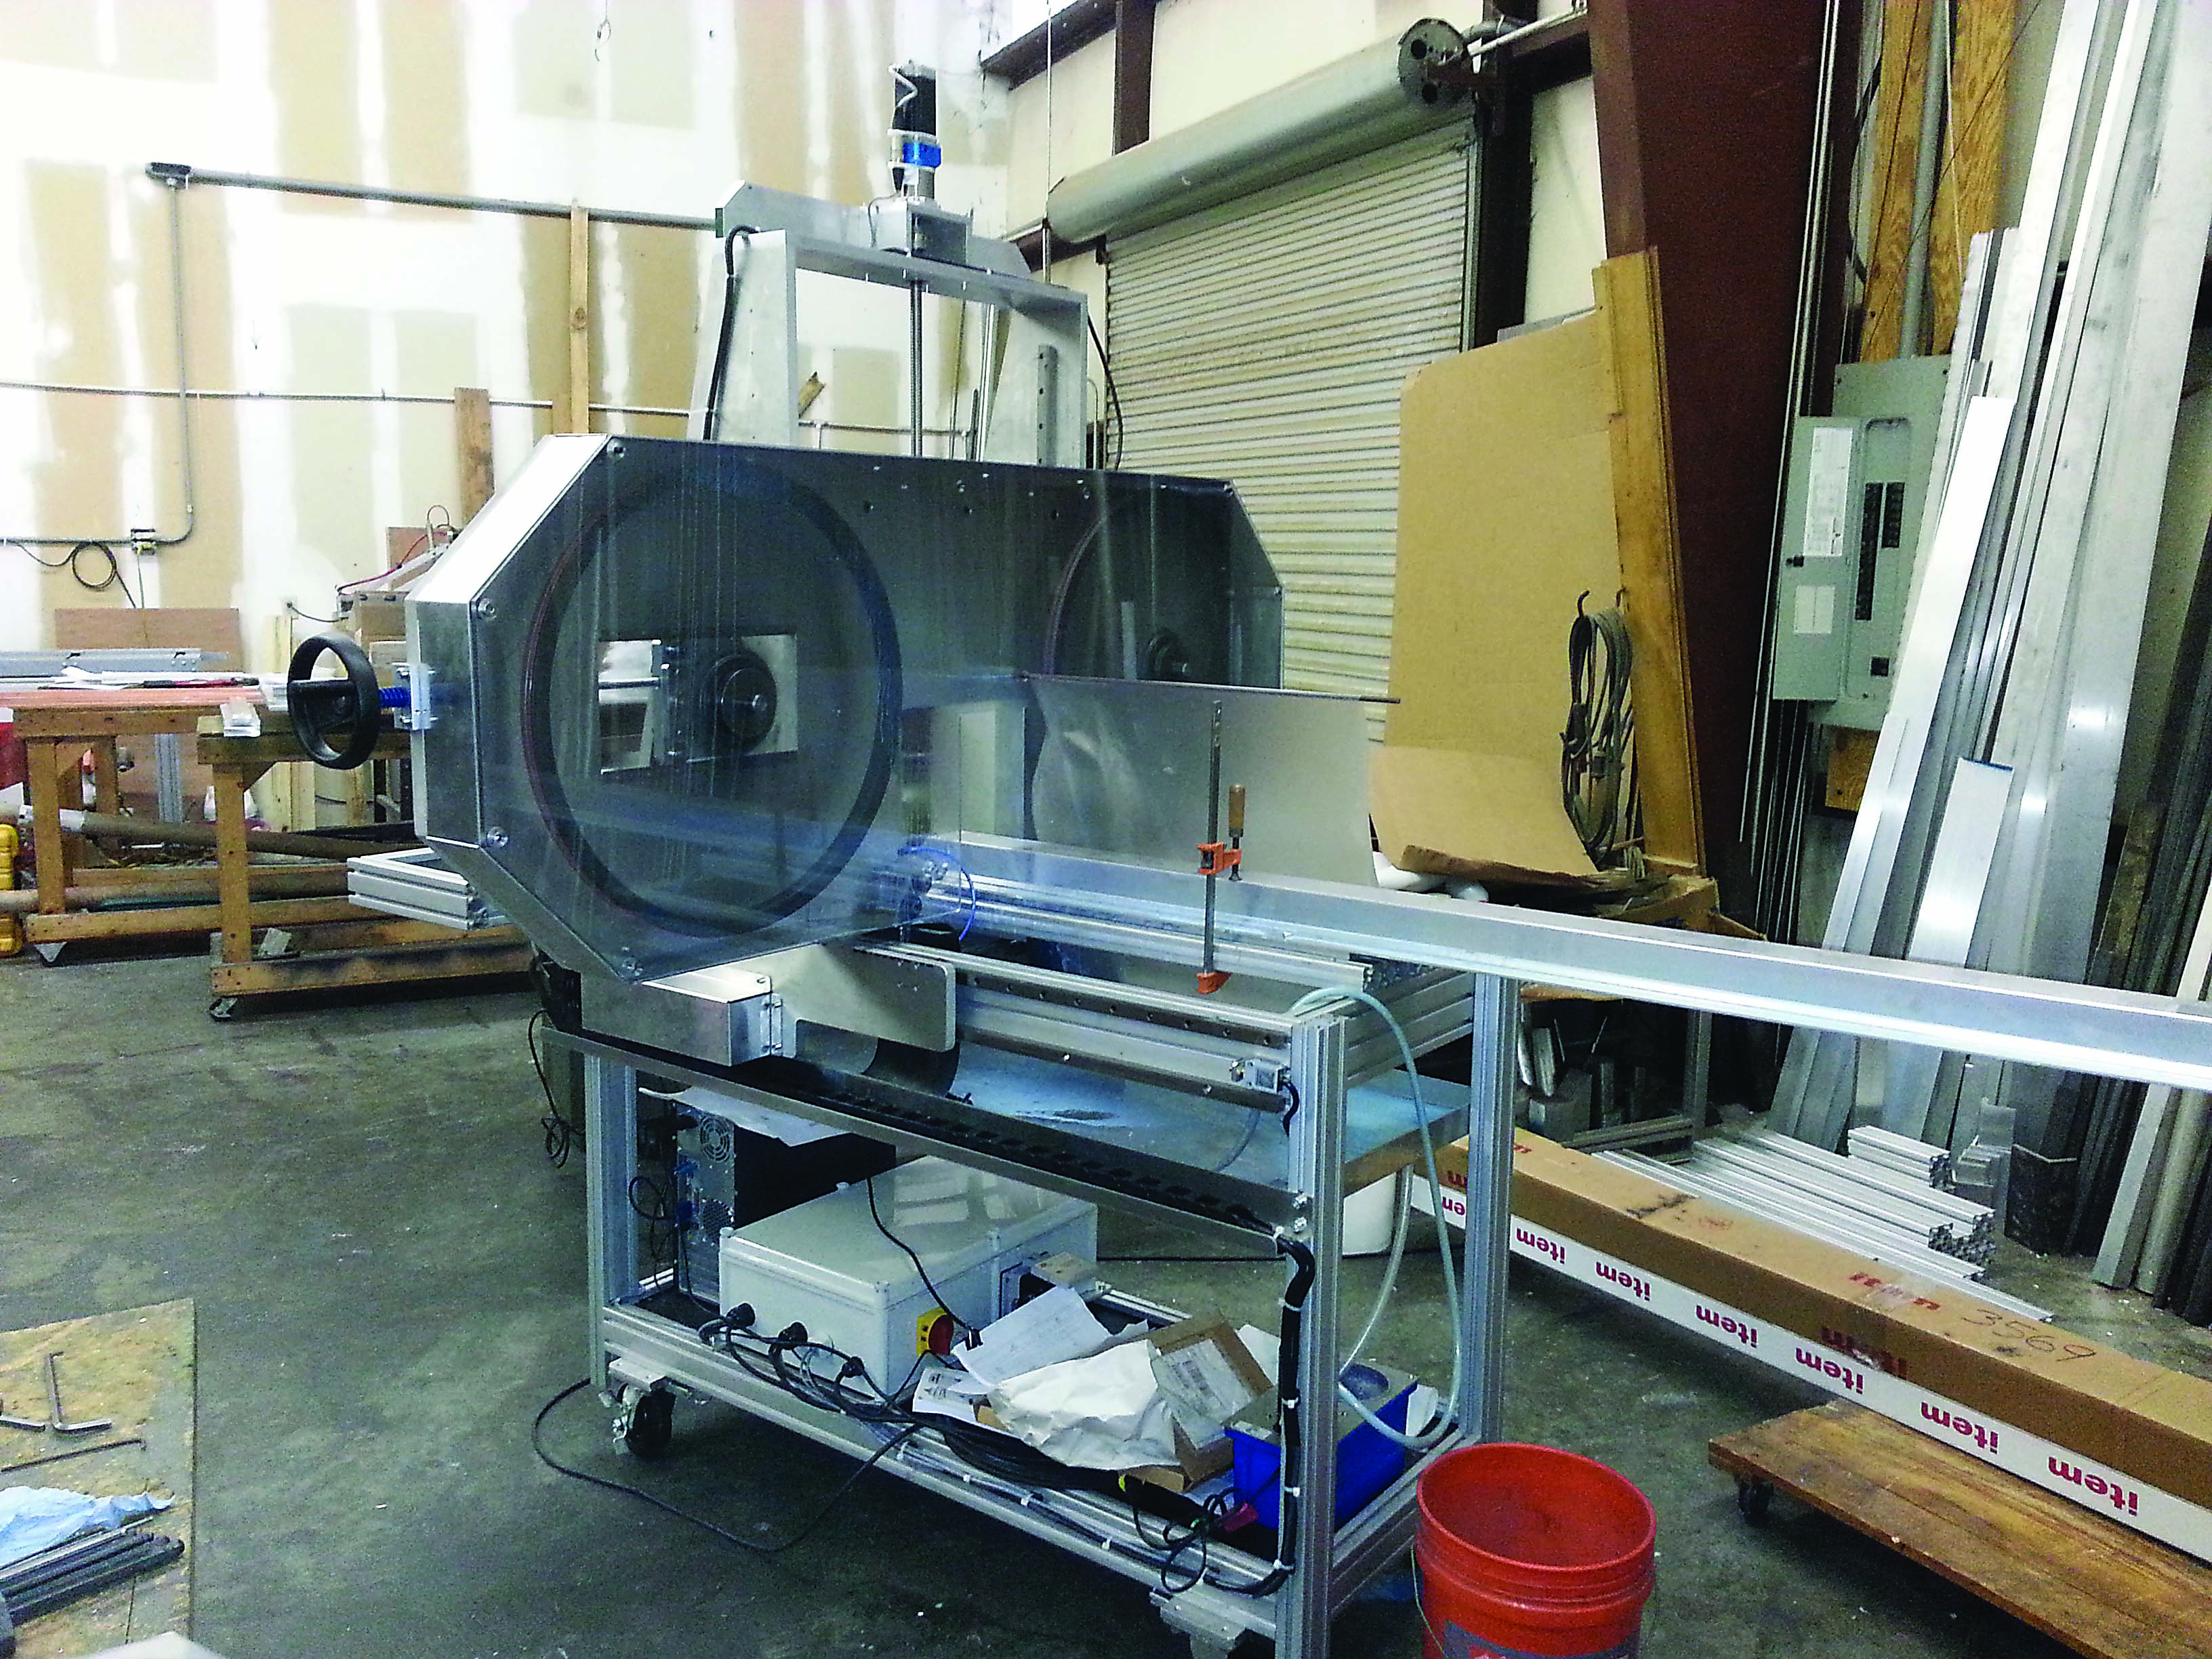 Panafab designed and built a custom bandsaw machine to sequentially cut aluminum handles from an aluminum extrusion.